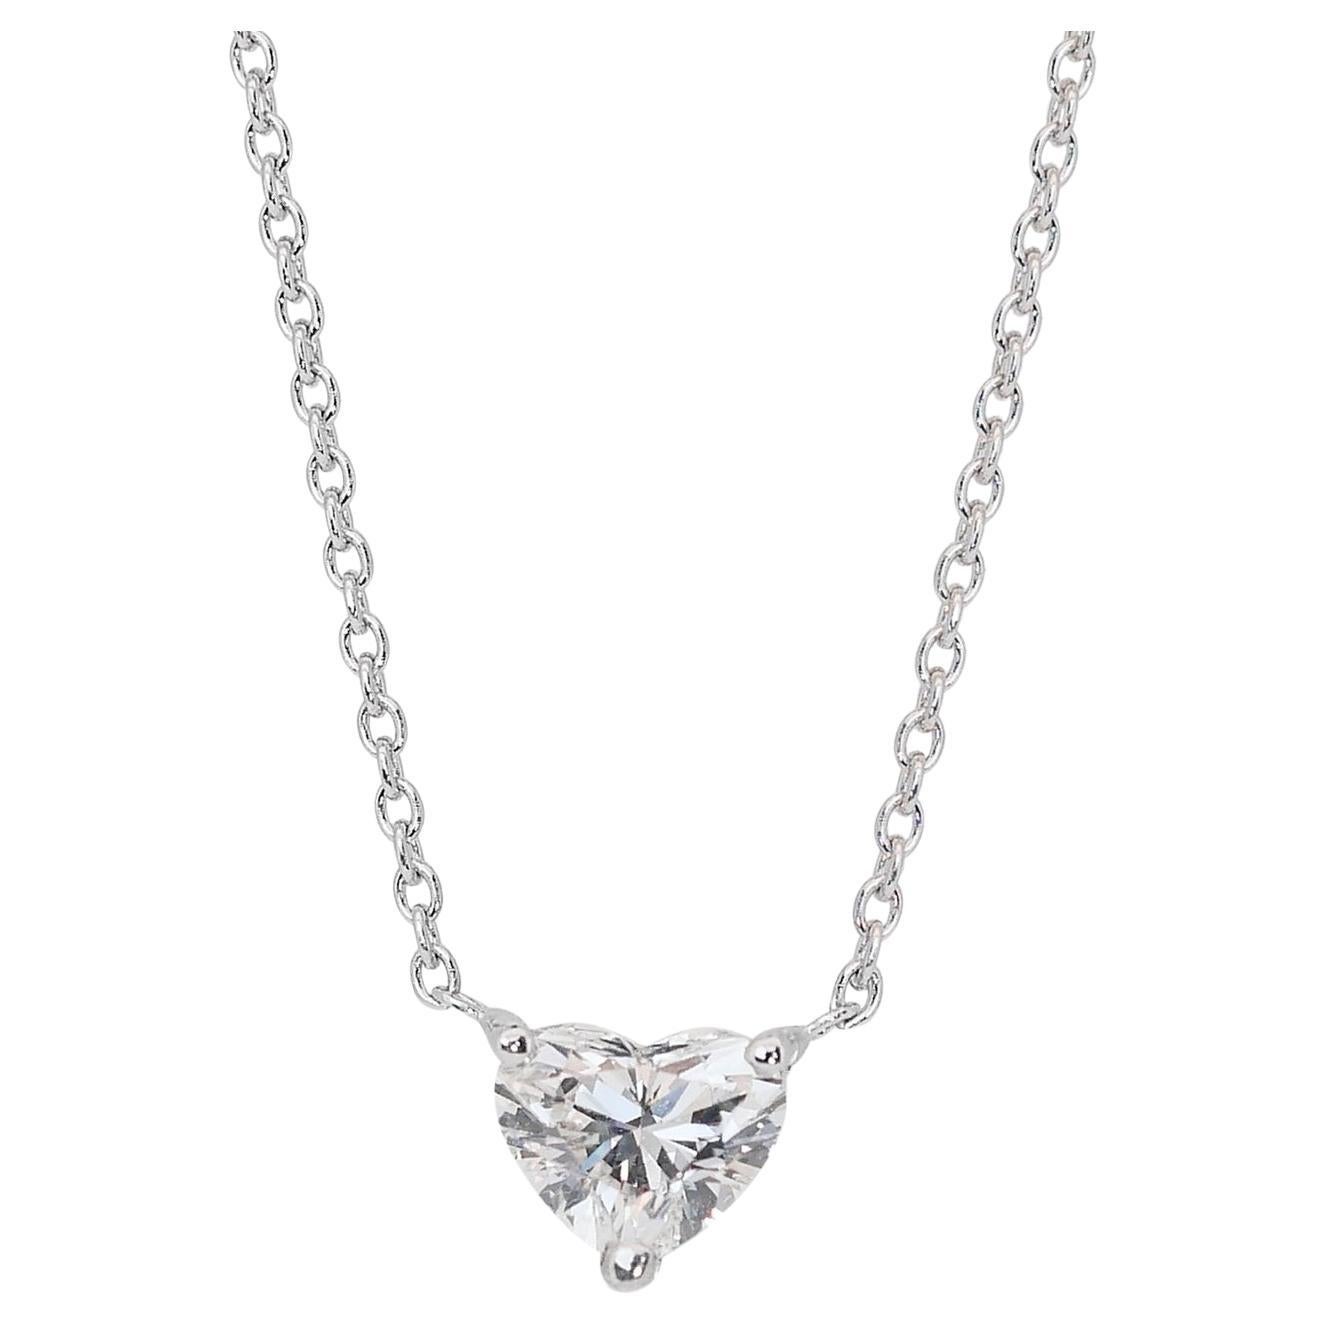 Enchanting 18k White Gold Heart-Shaped Diamond Solitaire Necklace w/0.71 ct  For Sale